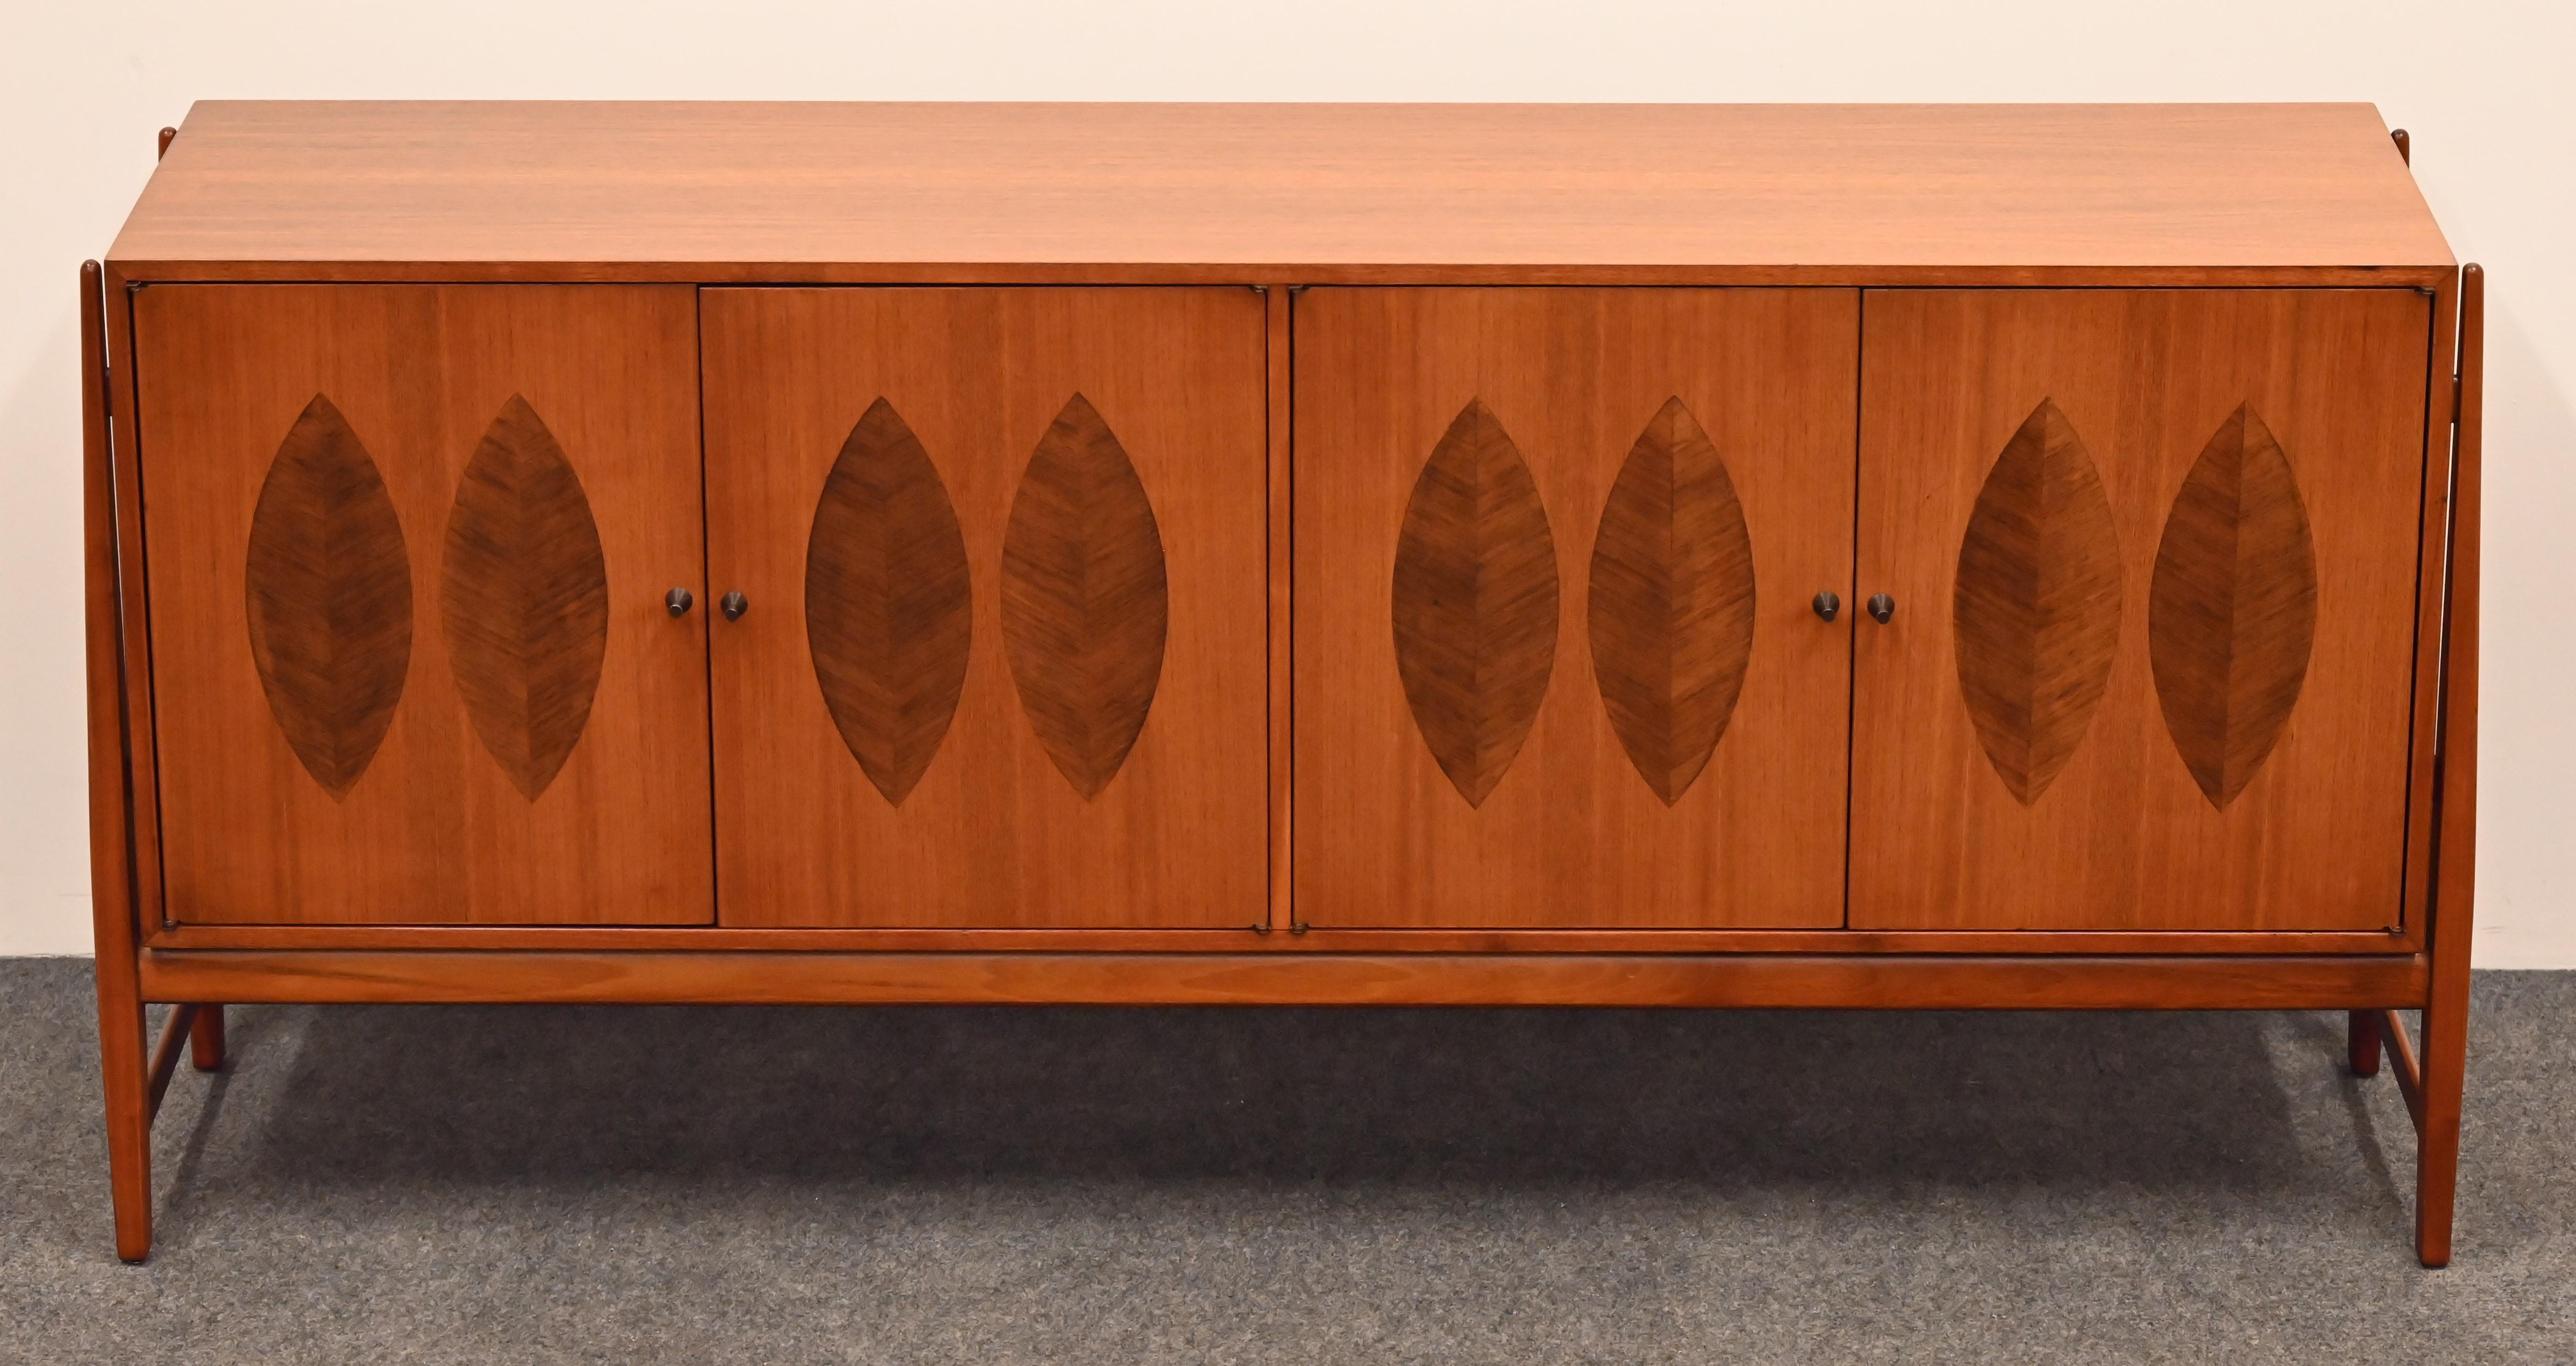 An organic modern Credenza designed by Kipp Stewart for Calvin. This beautiful cabinet has four doors, two drawers, and a new glass shelf in the interior for ample storage. The gorgeous walnut inlay of a stylized leaf design showcases this piece.